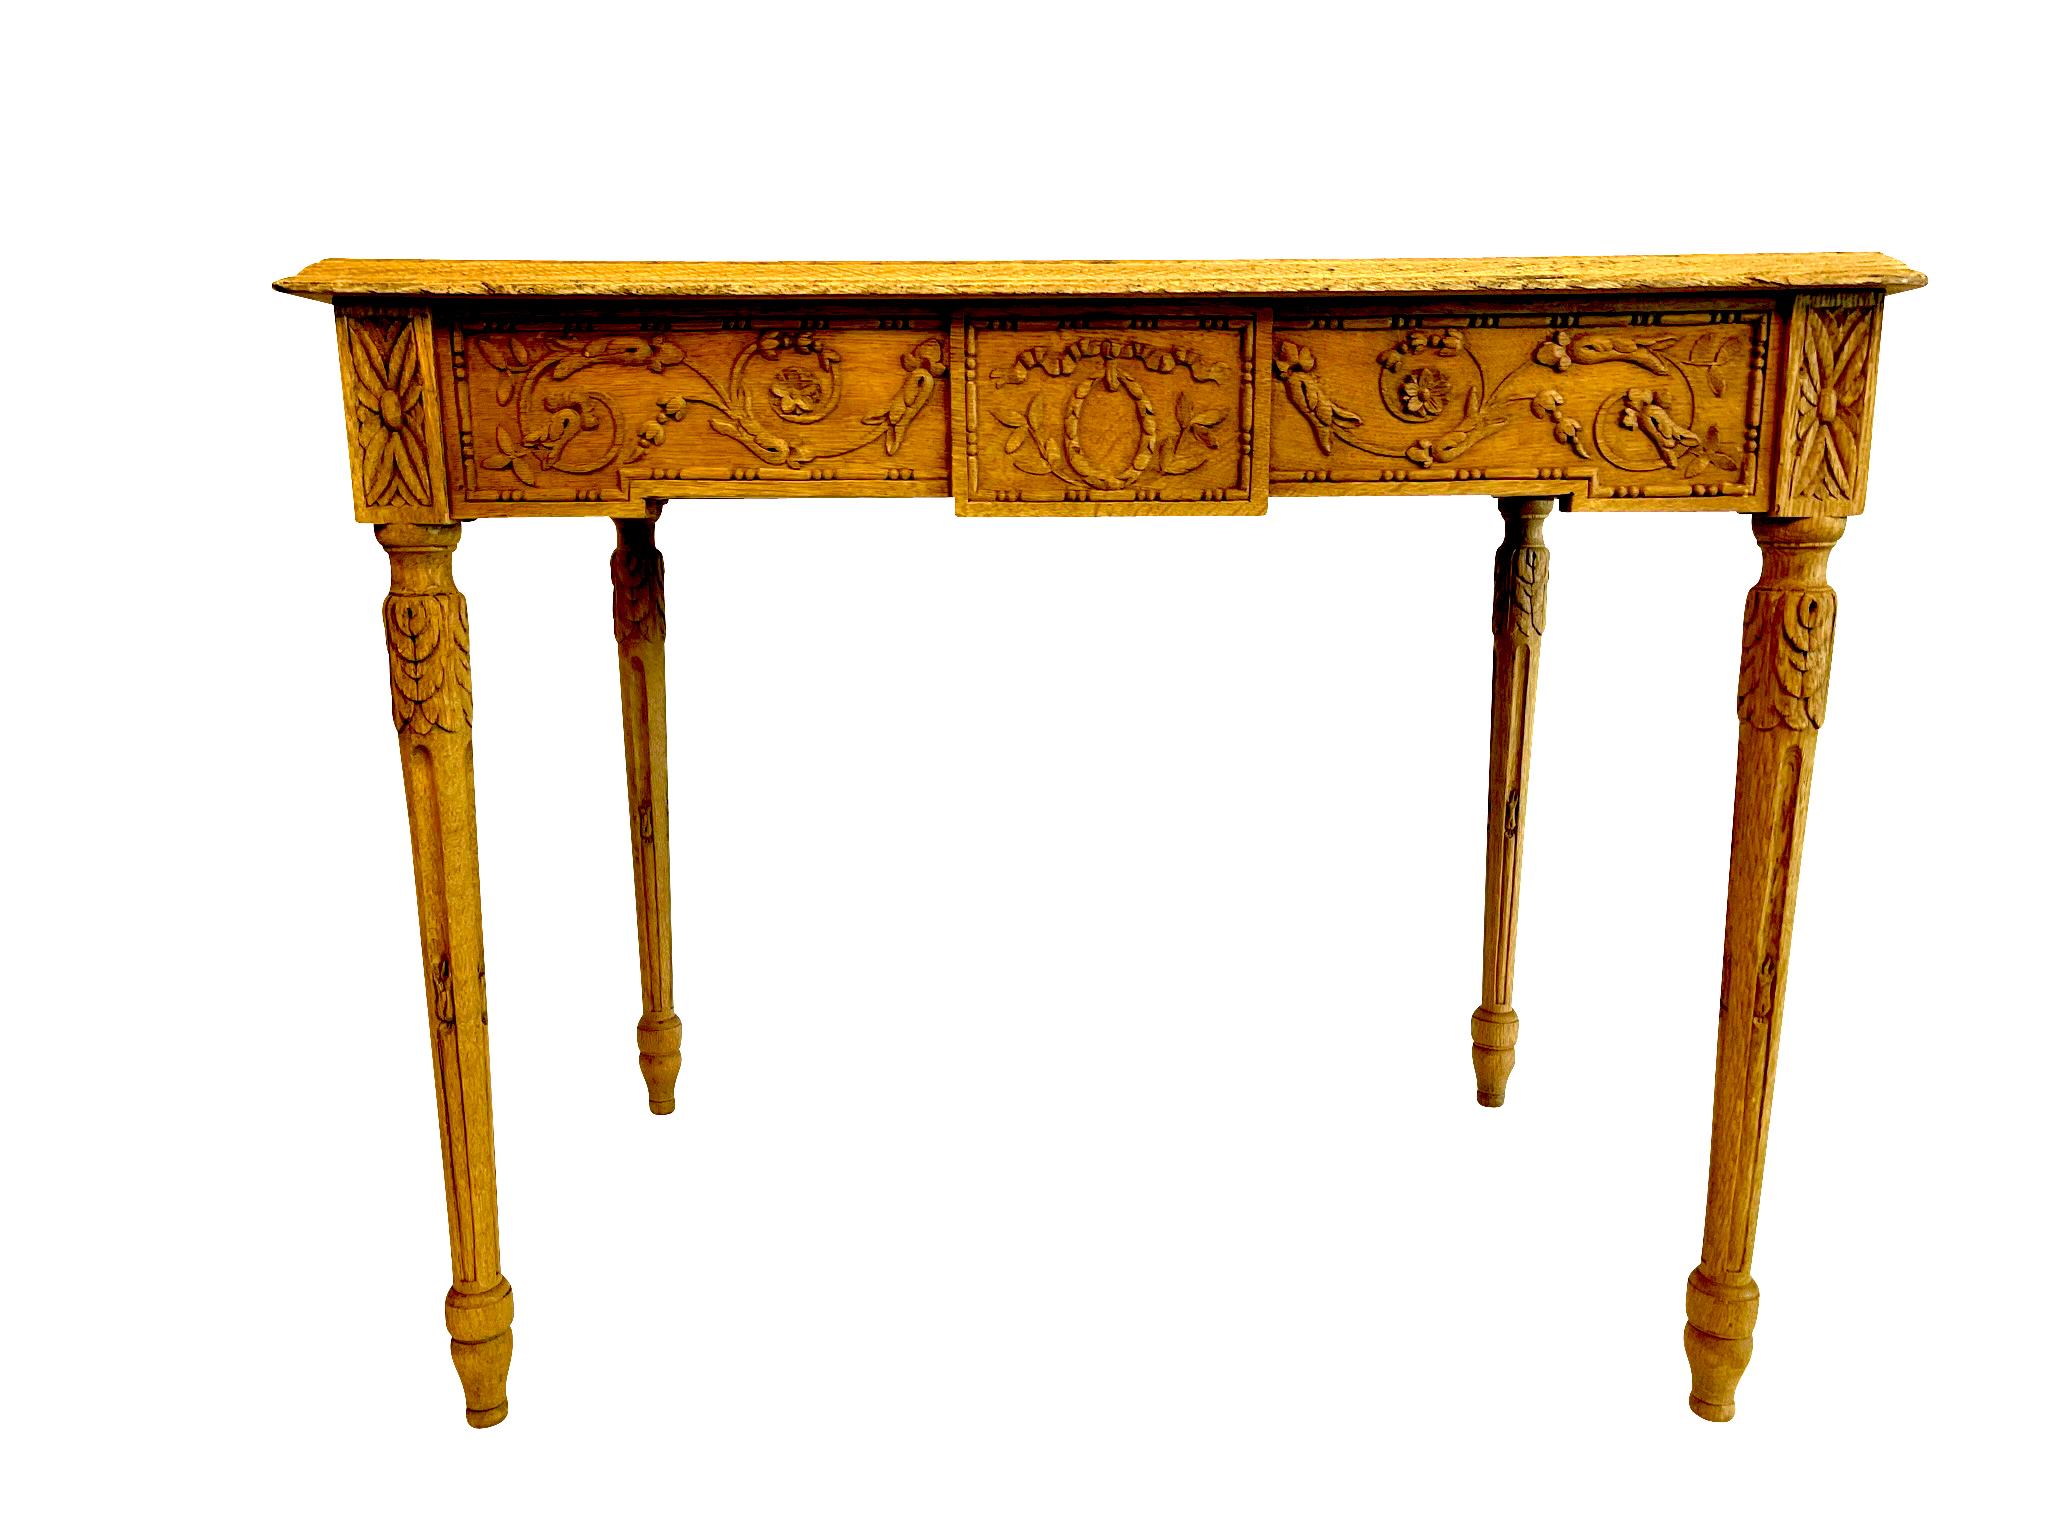 19th Century French Louis XVI Bleached Oak Side Table with Neoclassical Carved Designs  For Sale